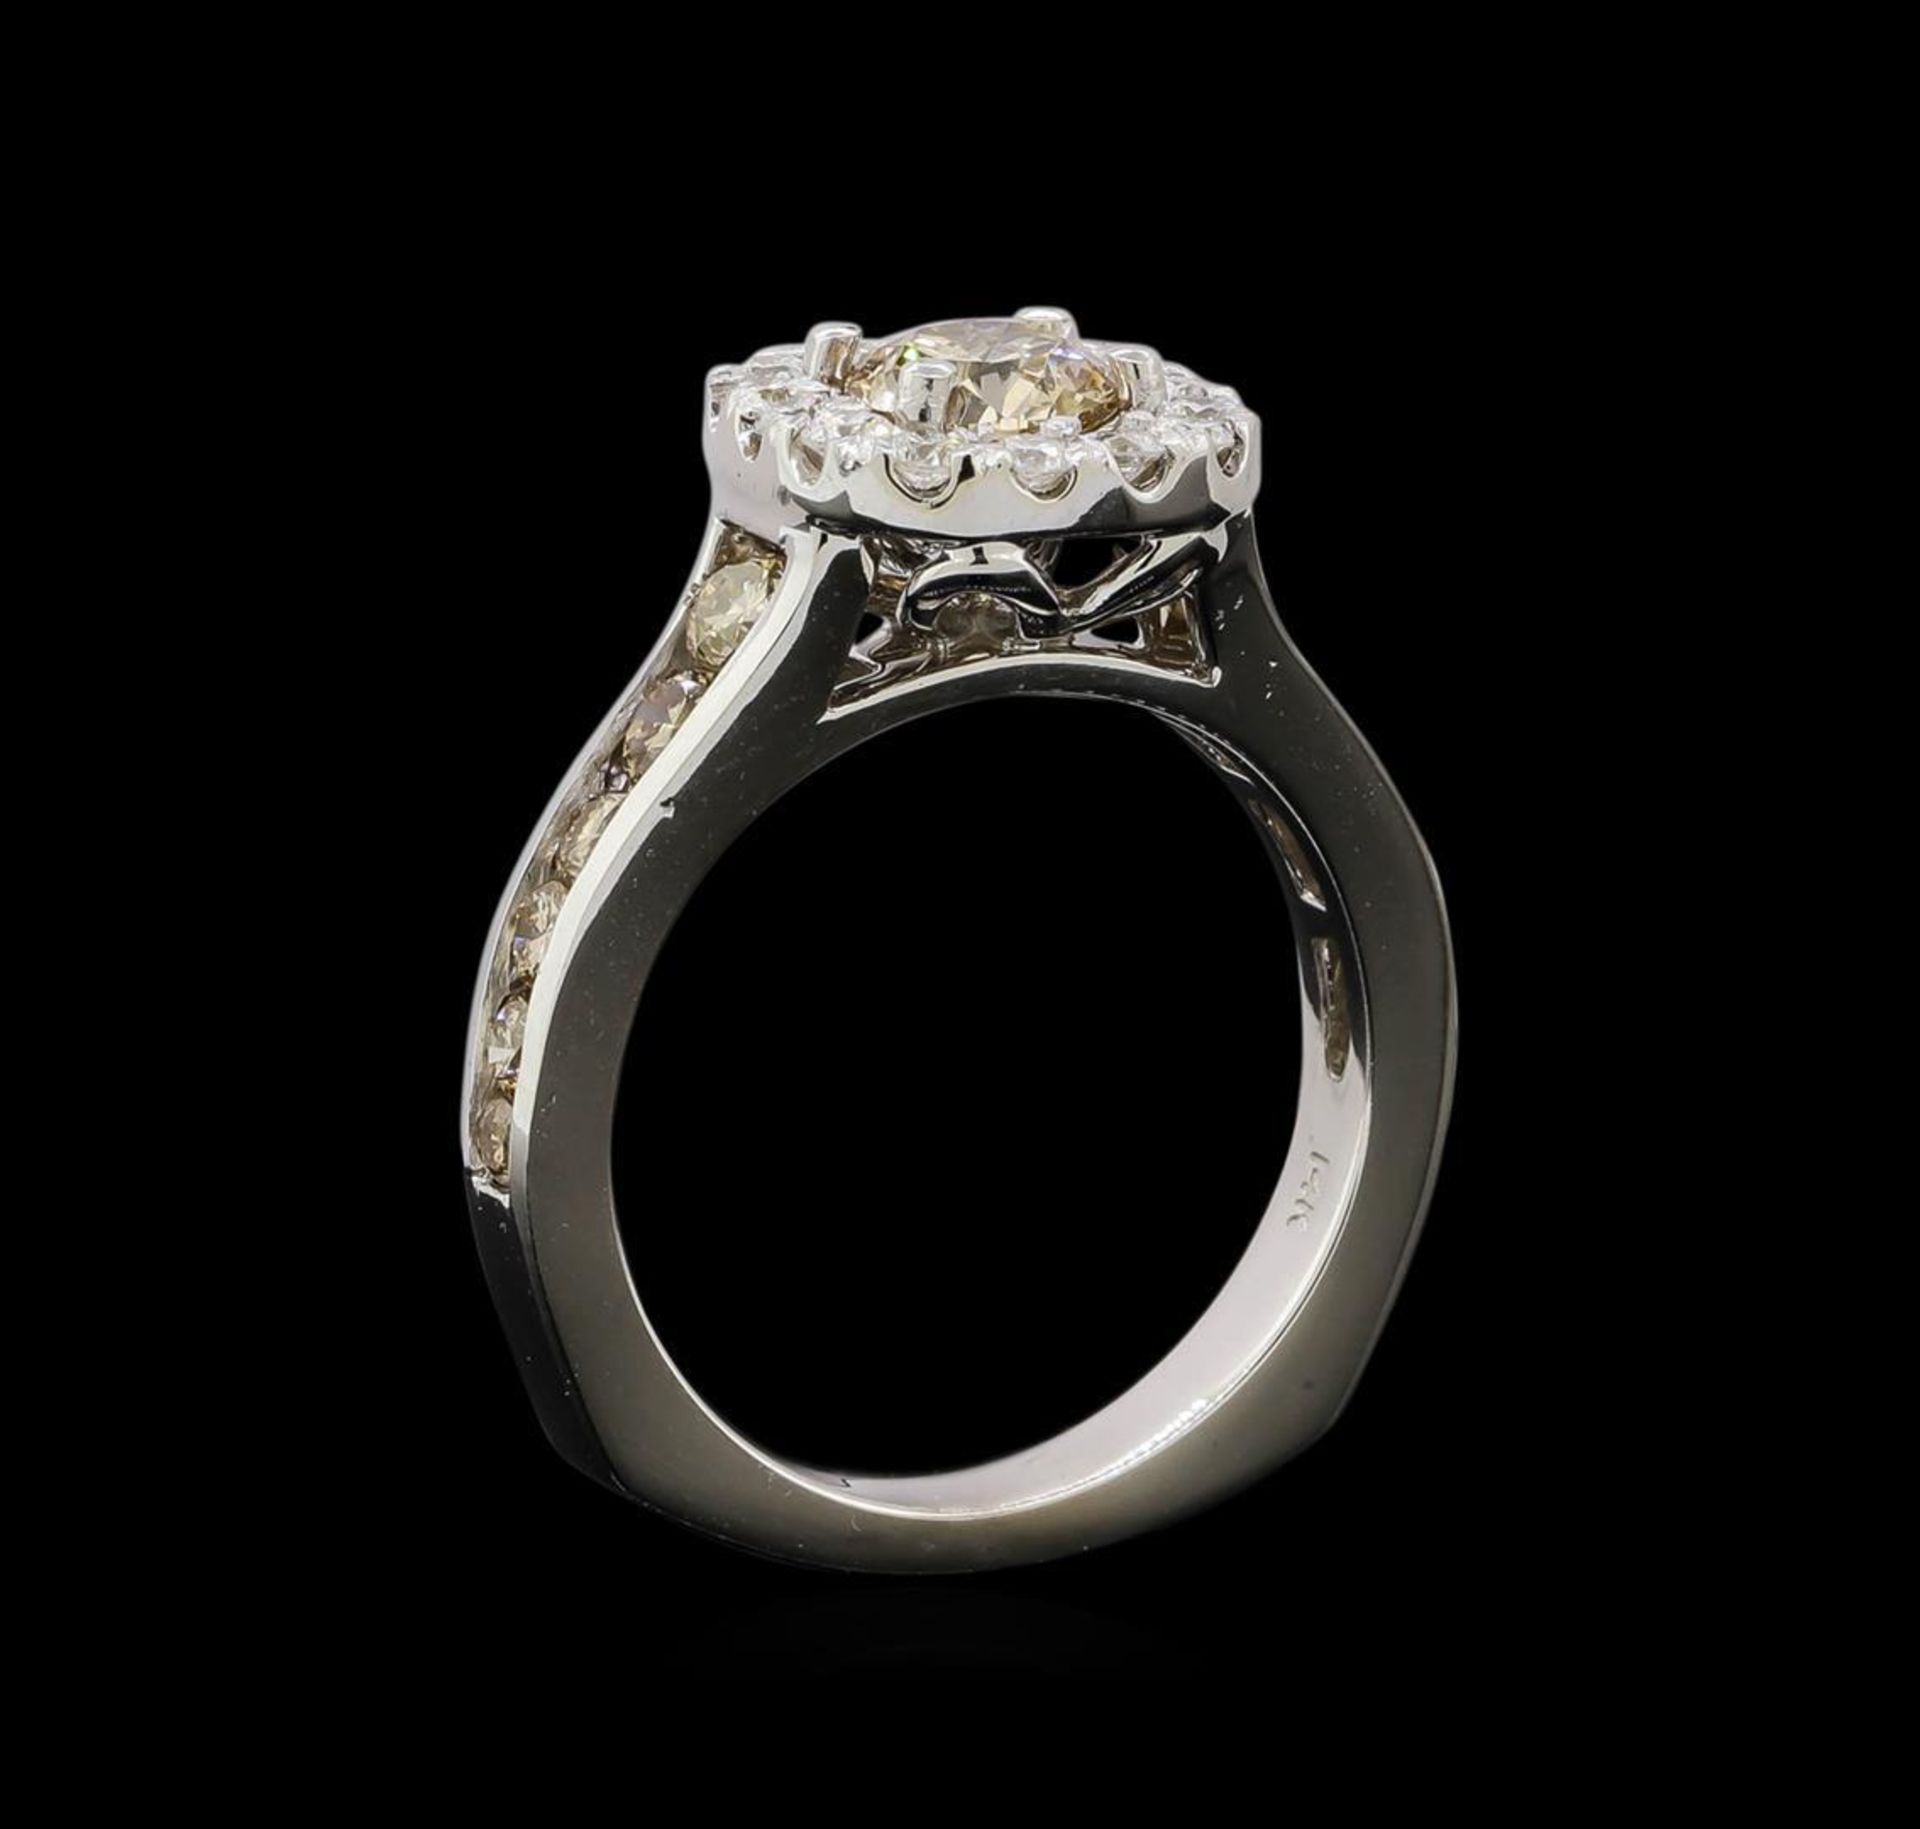 14KT White Gold 1.81 ctw Fancy Brown Diamond Ring - Image 4 of 5